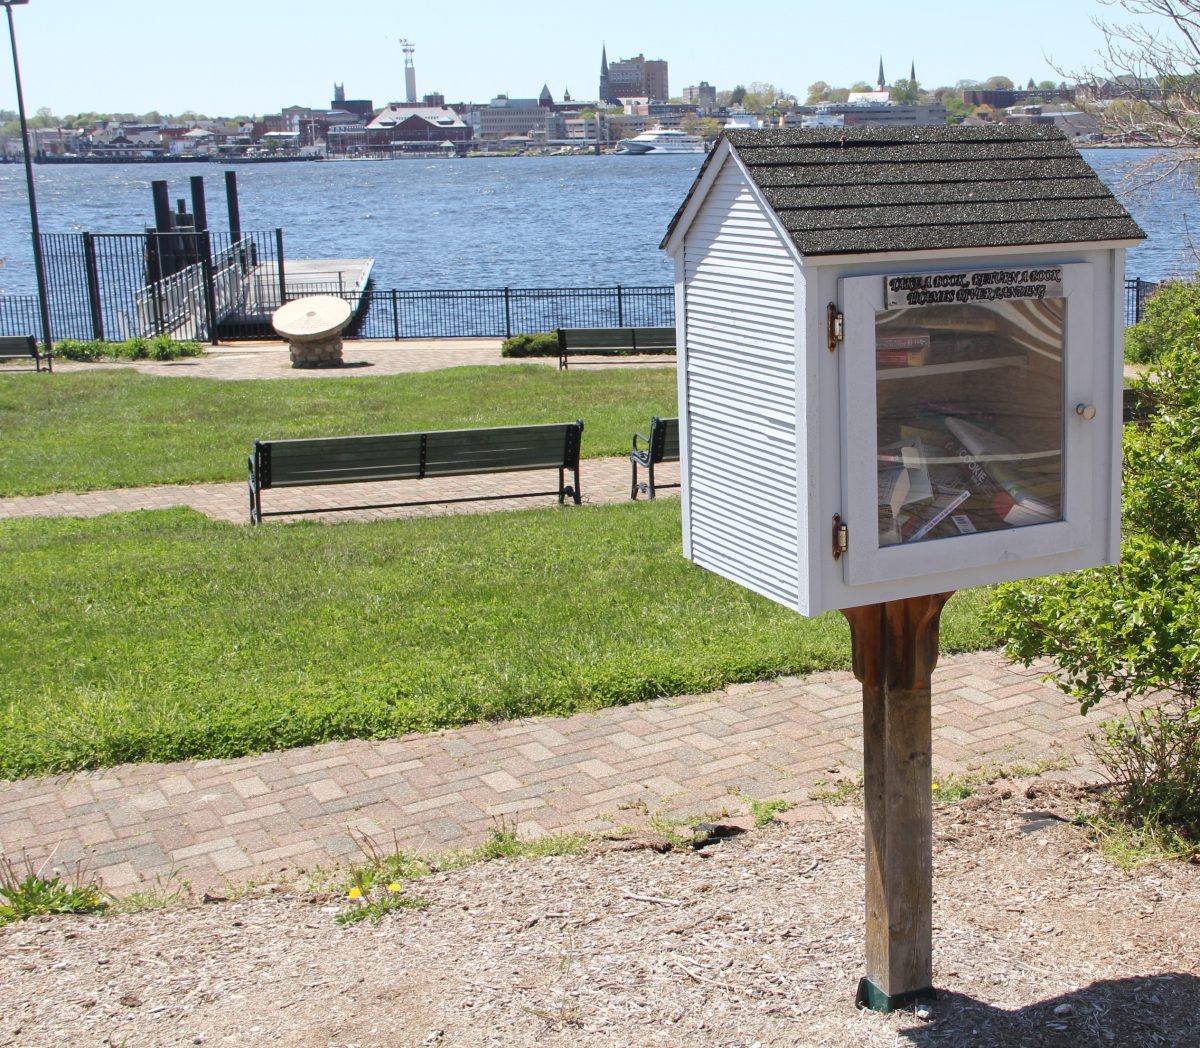 The Fort Griswold and Hidden Thames Street Quests both begin at Thames River Landing Park on Thames Street in Groton.